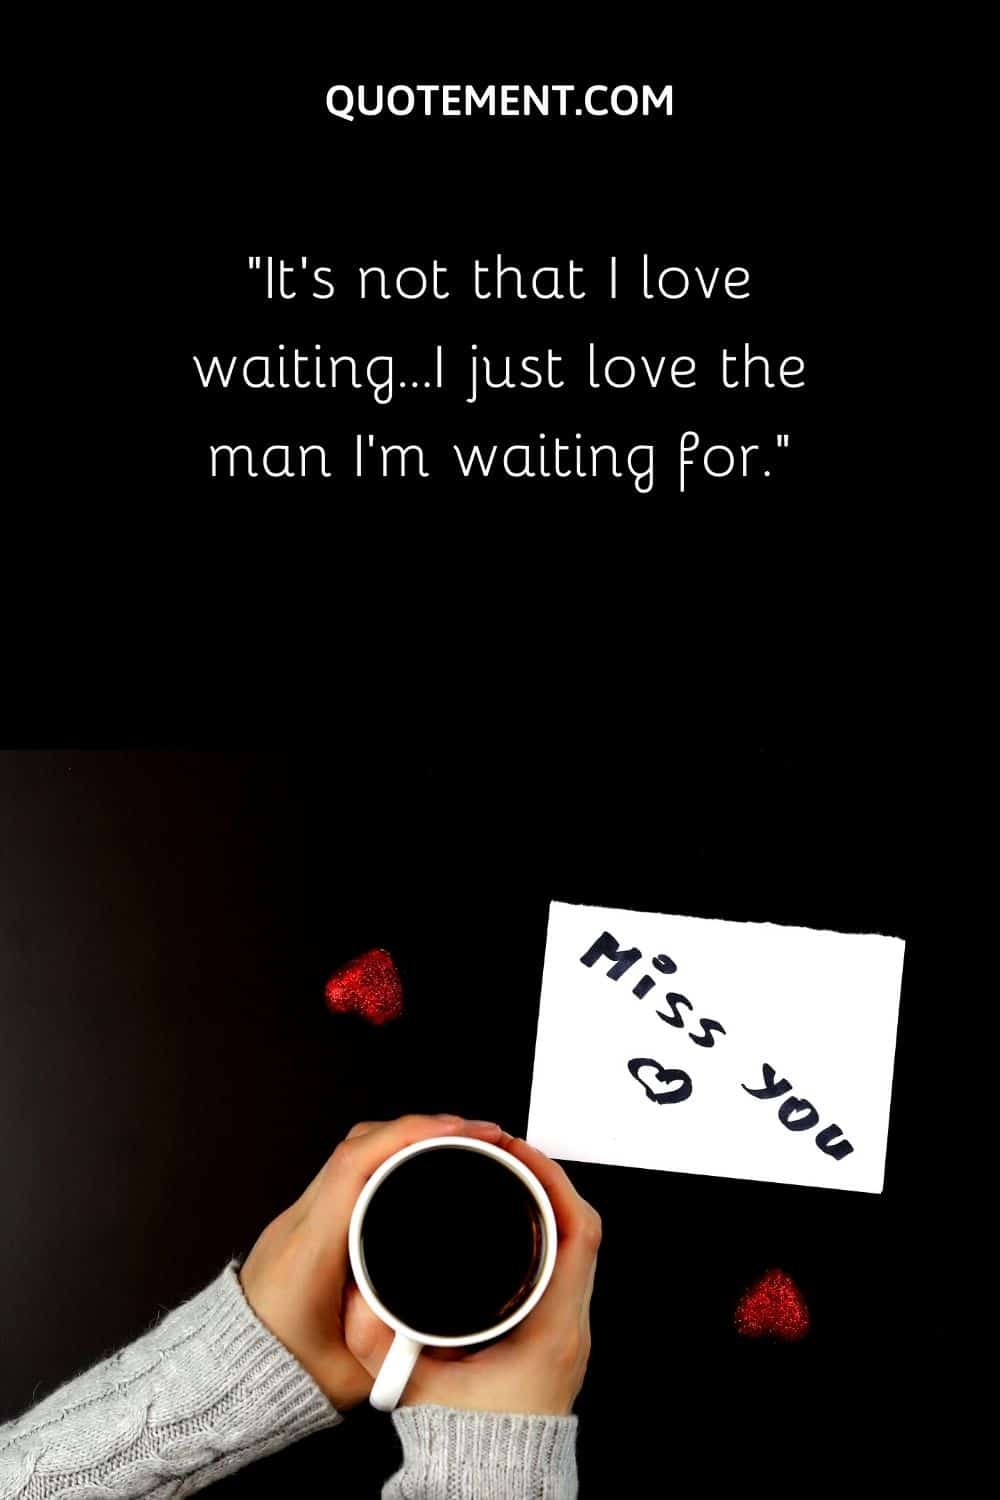 It’s not that I love waiting...I just love the man I’m waiting for.